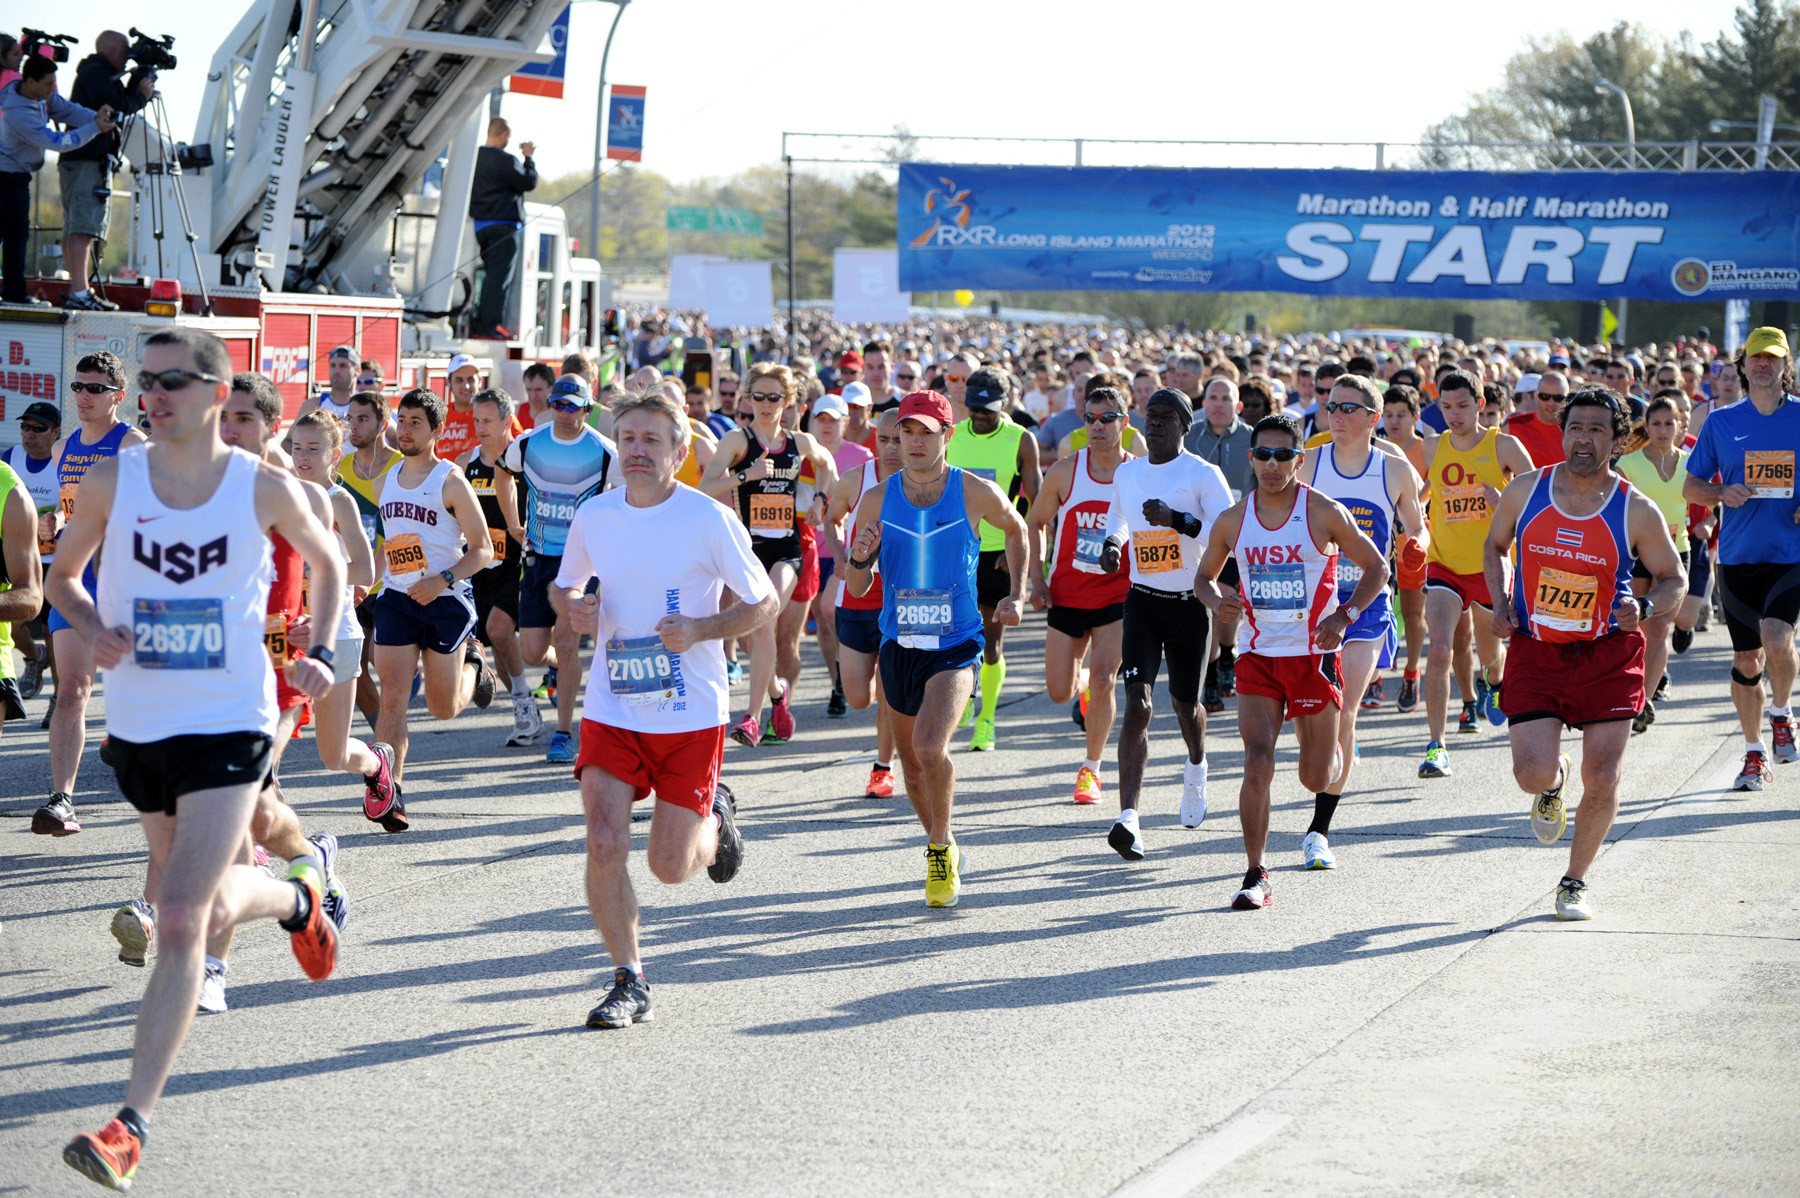 More than 8,000 runners took part in last weekend’s Long Island Marathon, which began on Charles Lindbergh Boulevard in Uniondale.